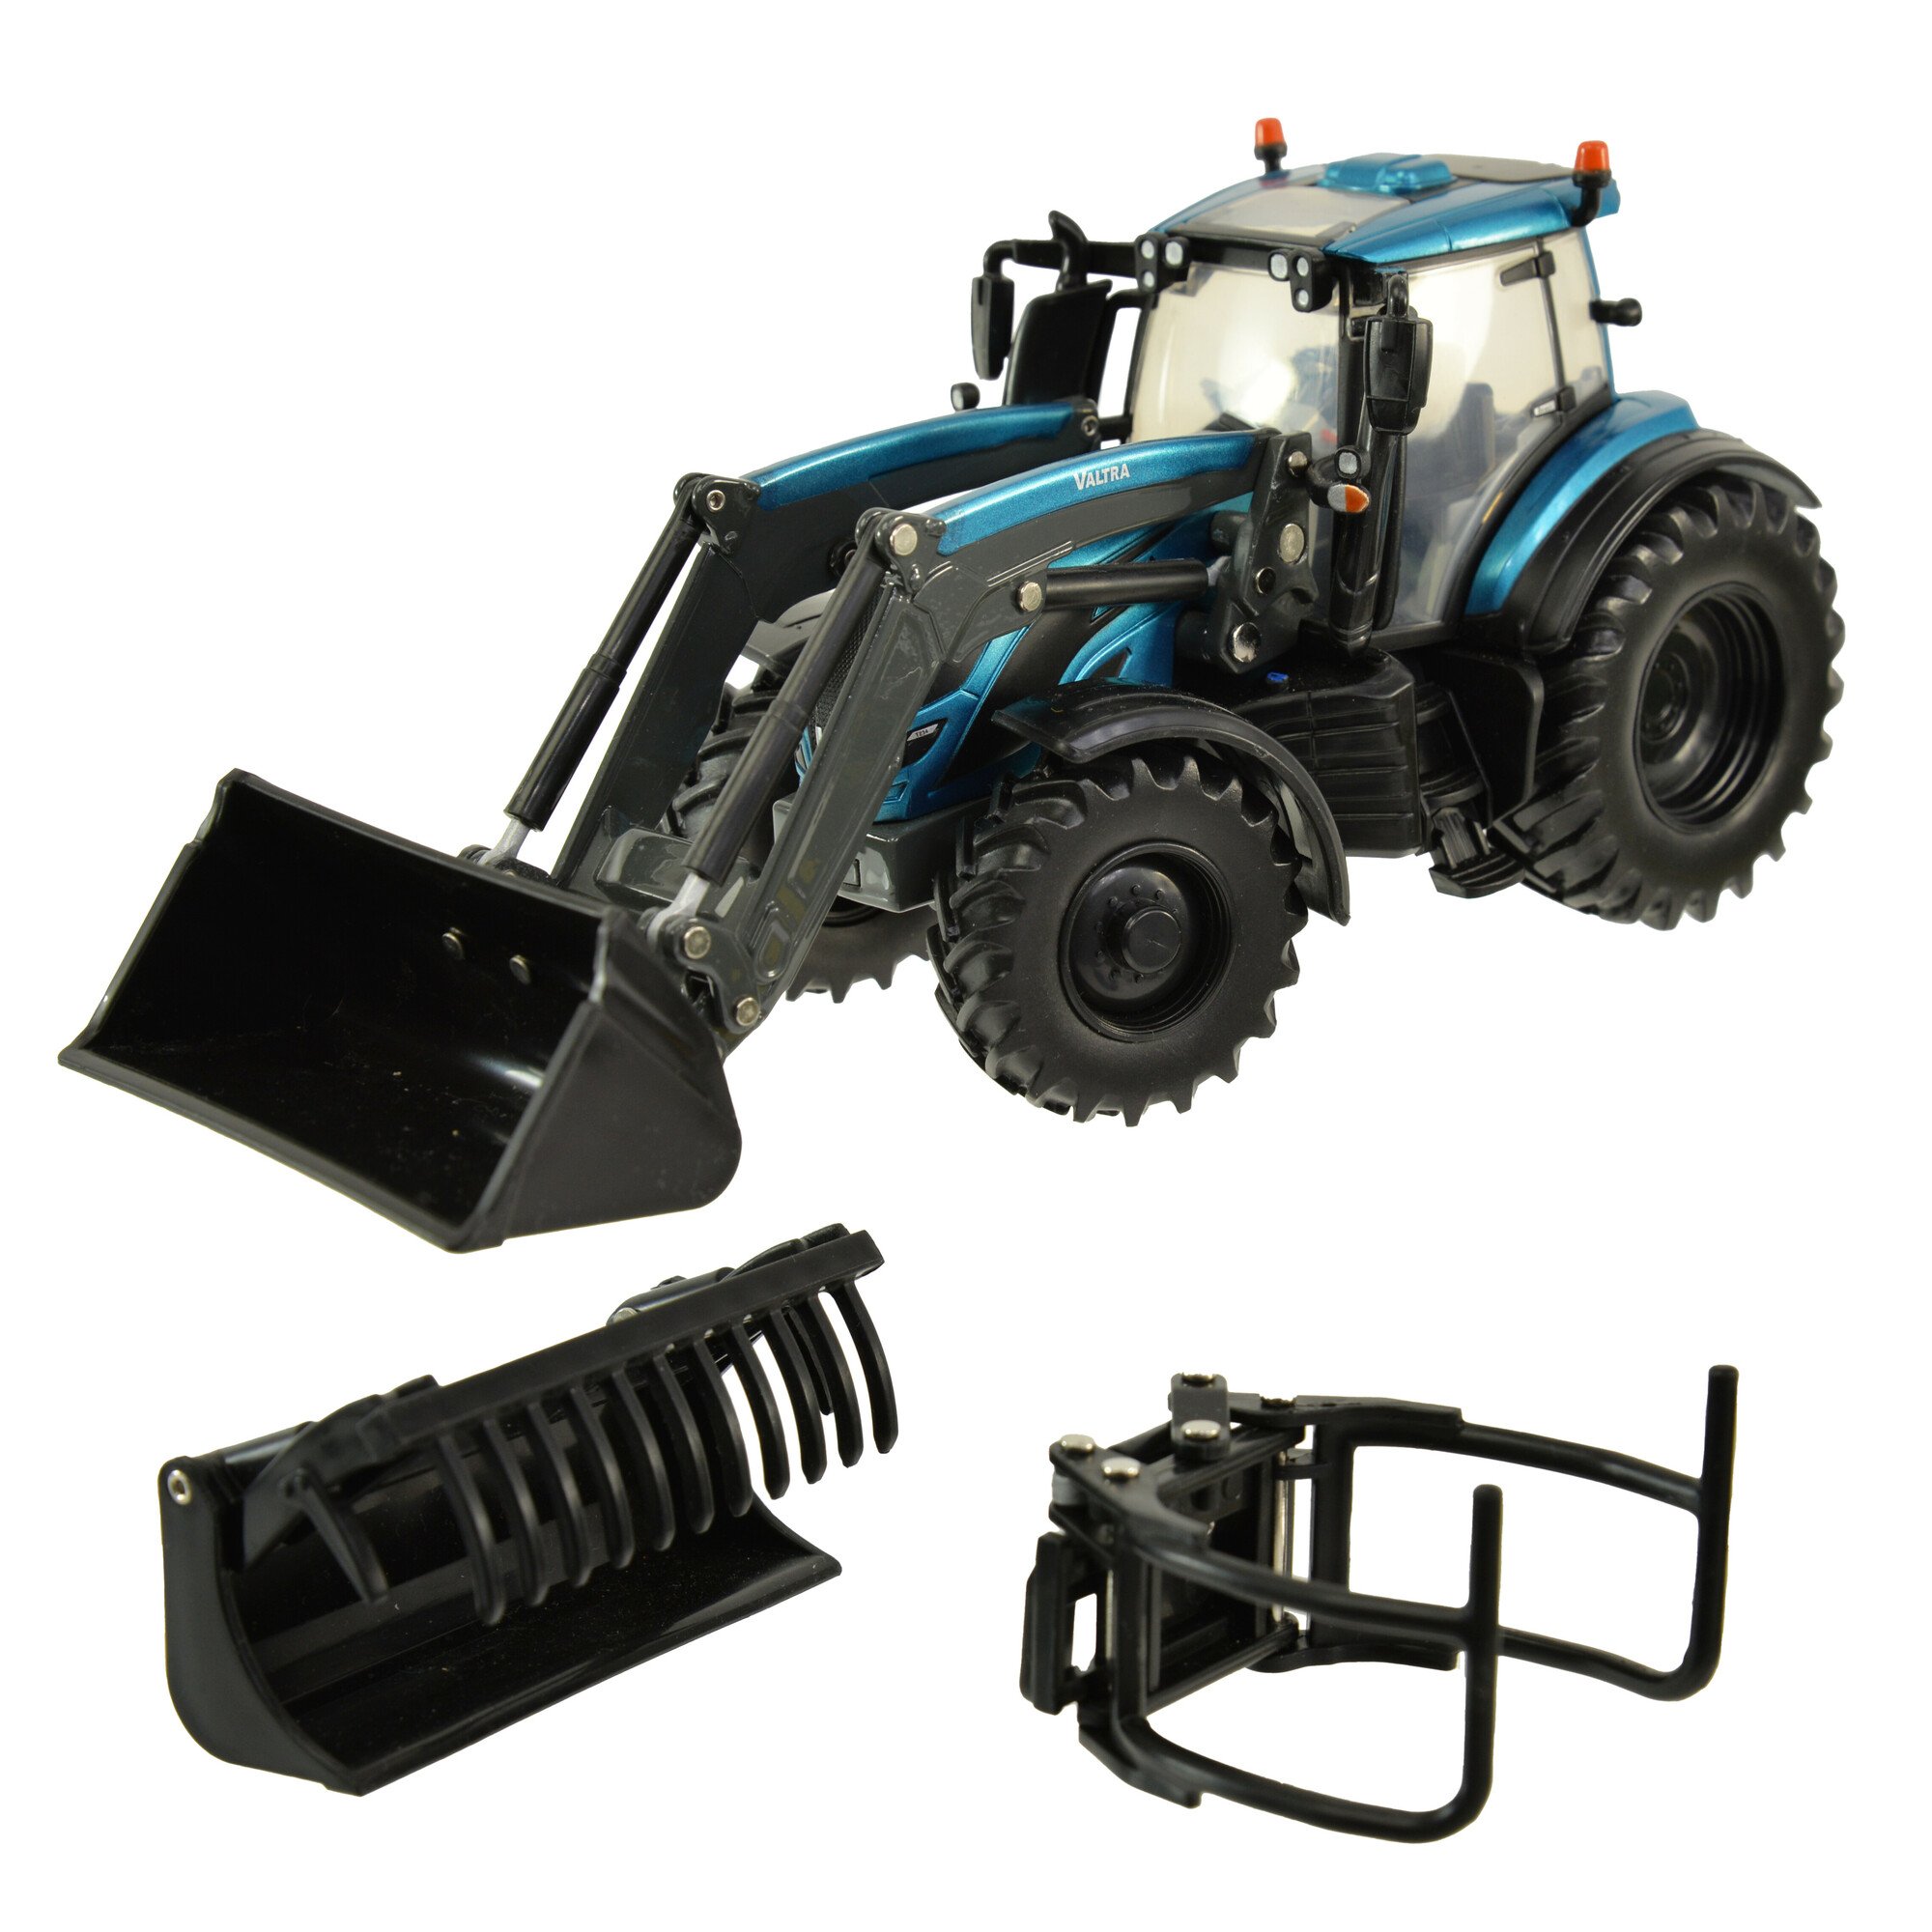 Valtra T234 with front loader scale model